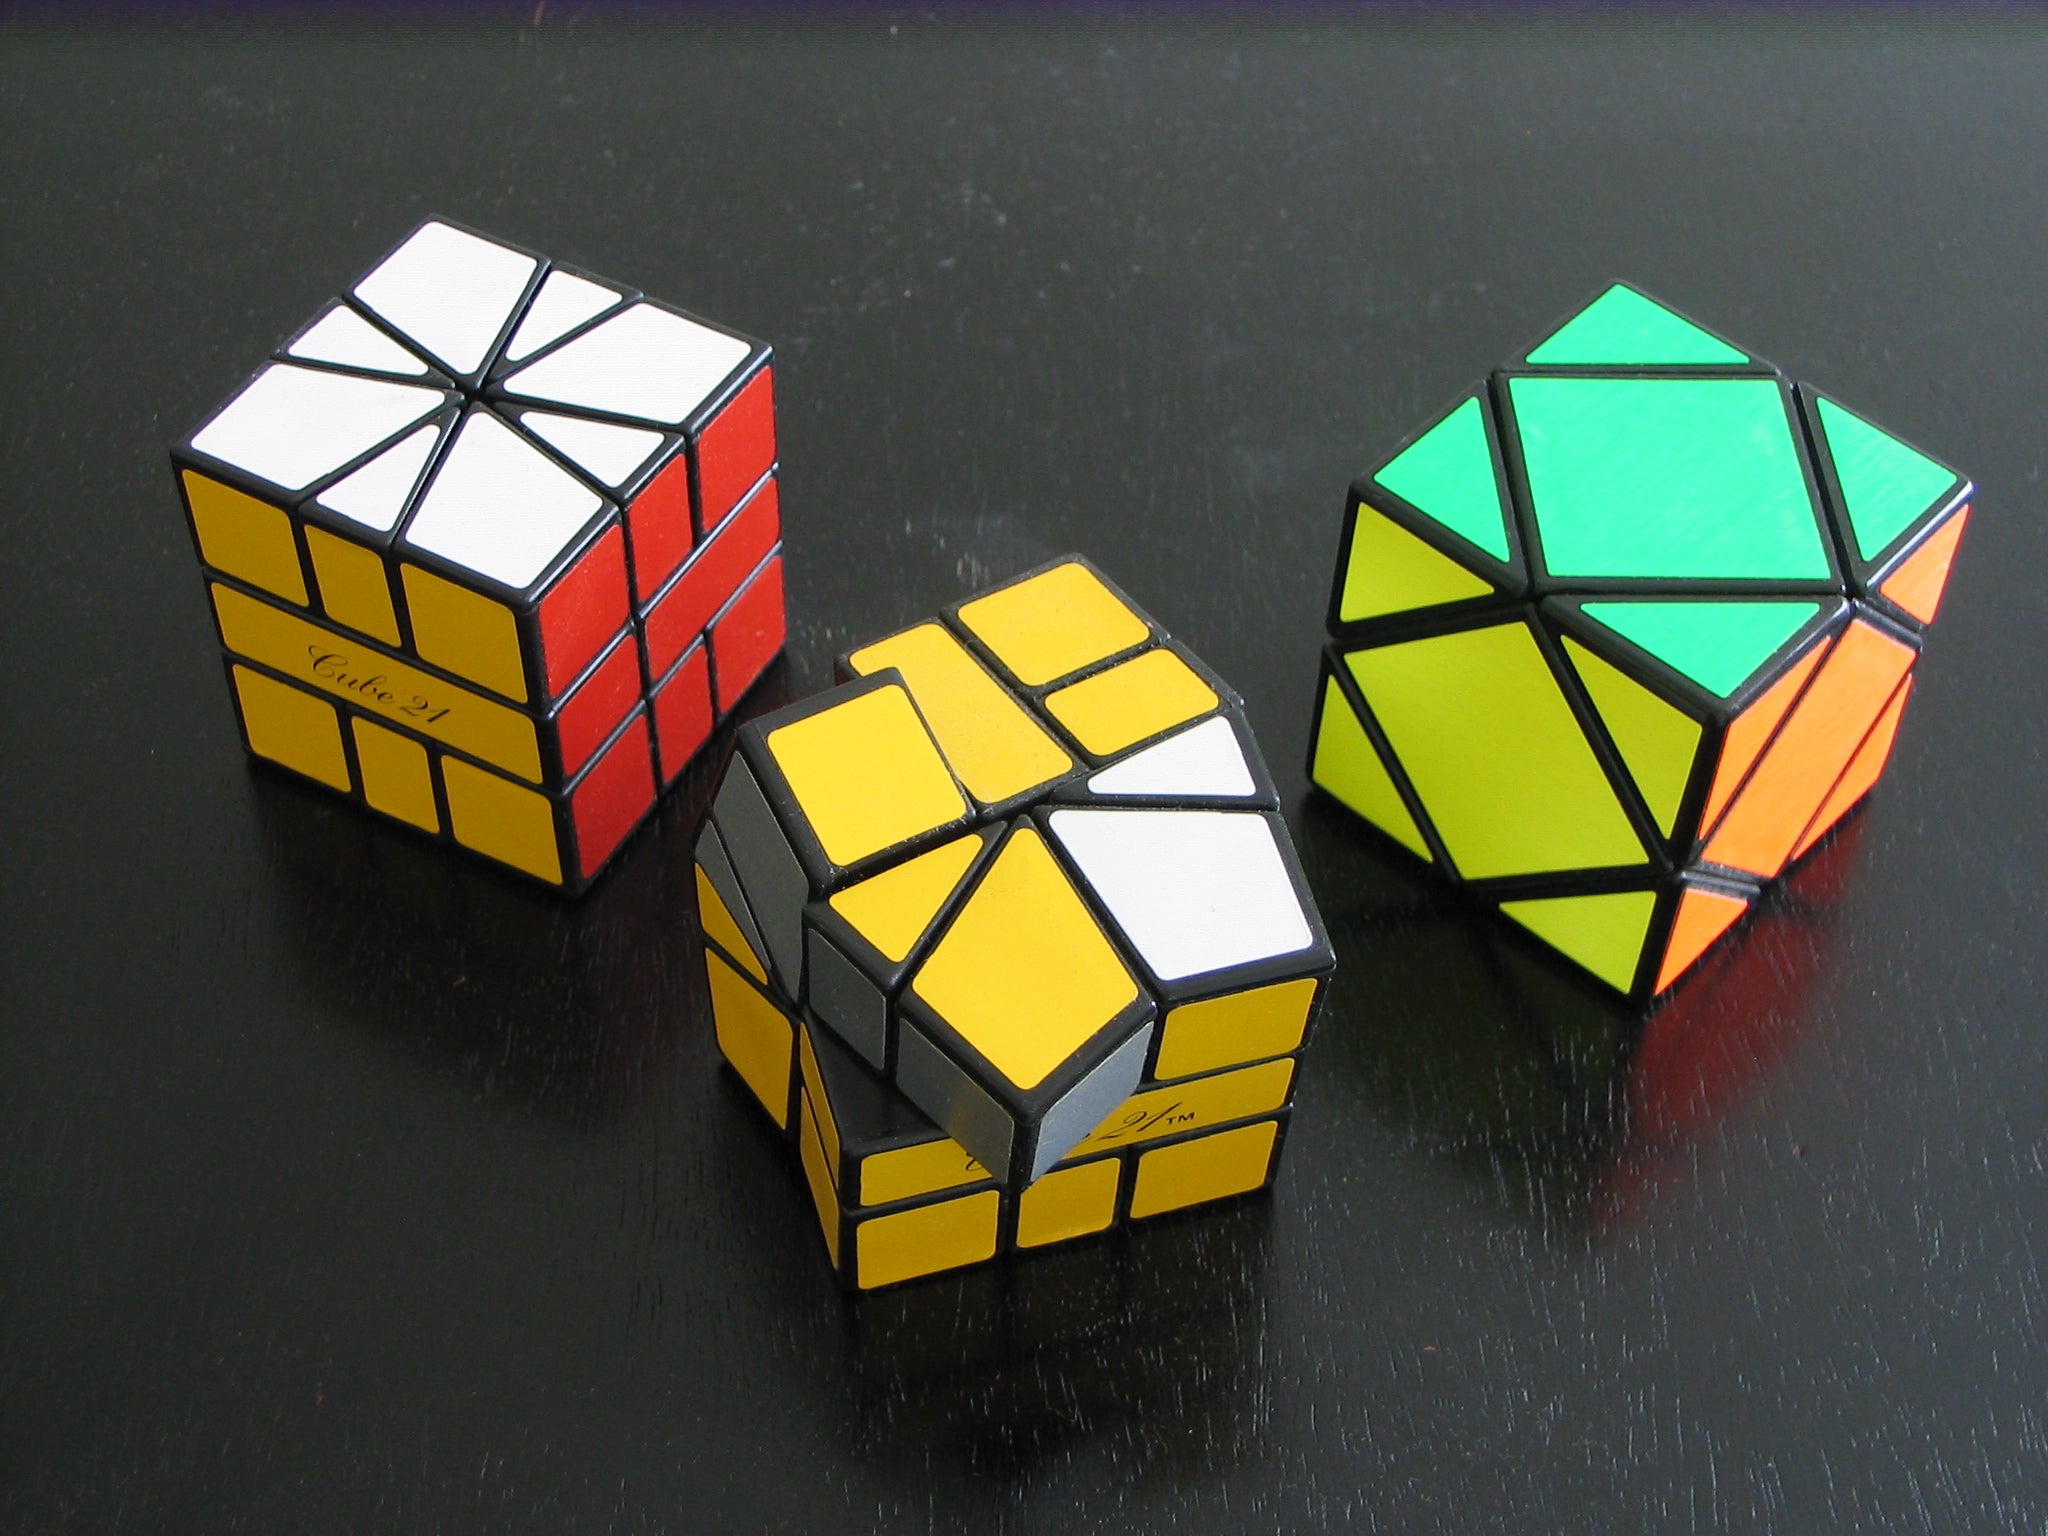 5 Different Types Of Twisty Puzzles You Should Know